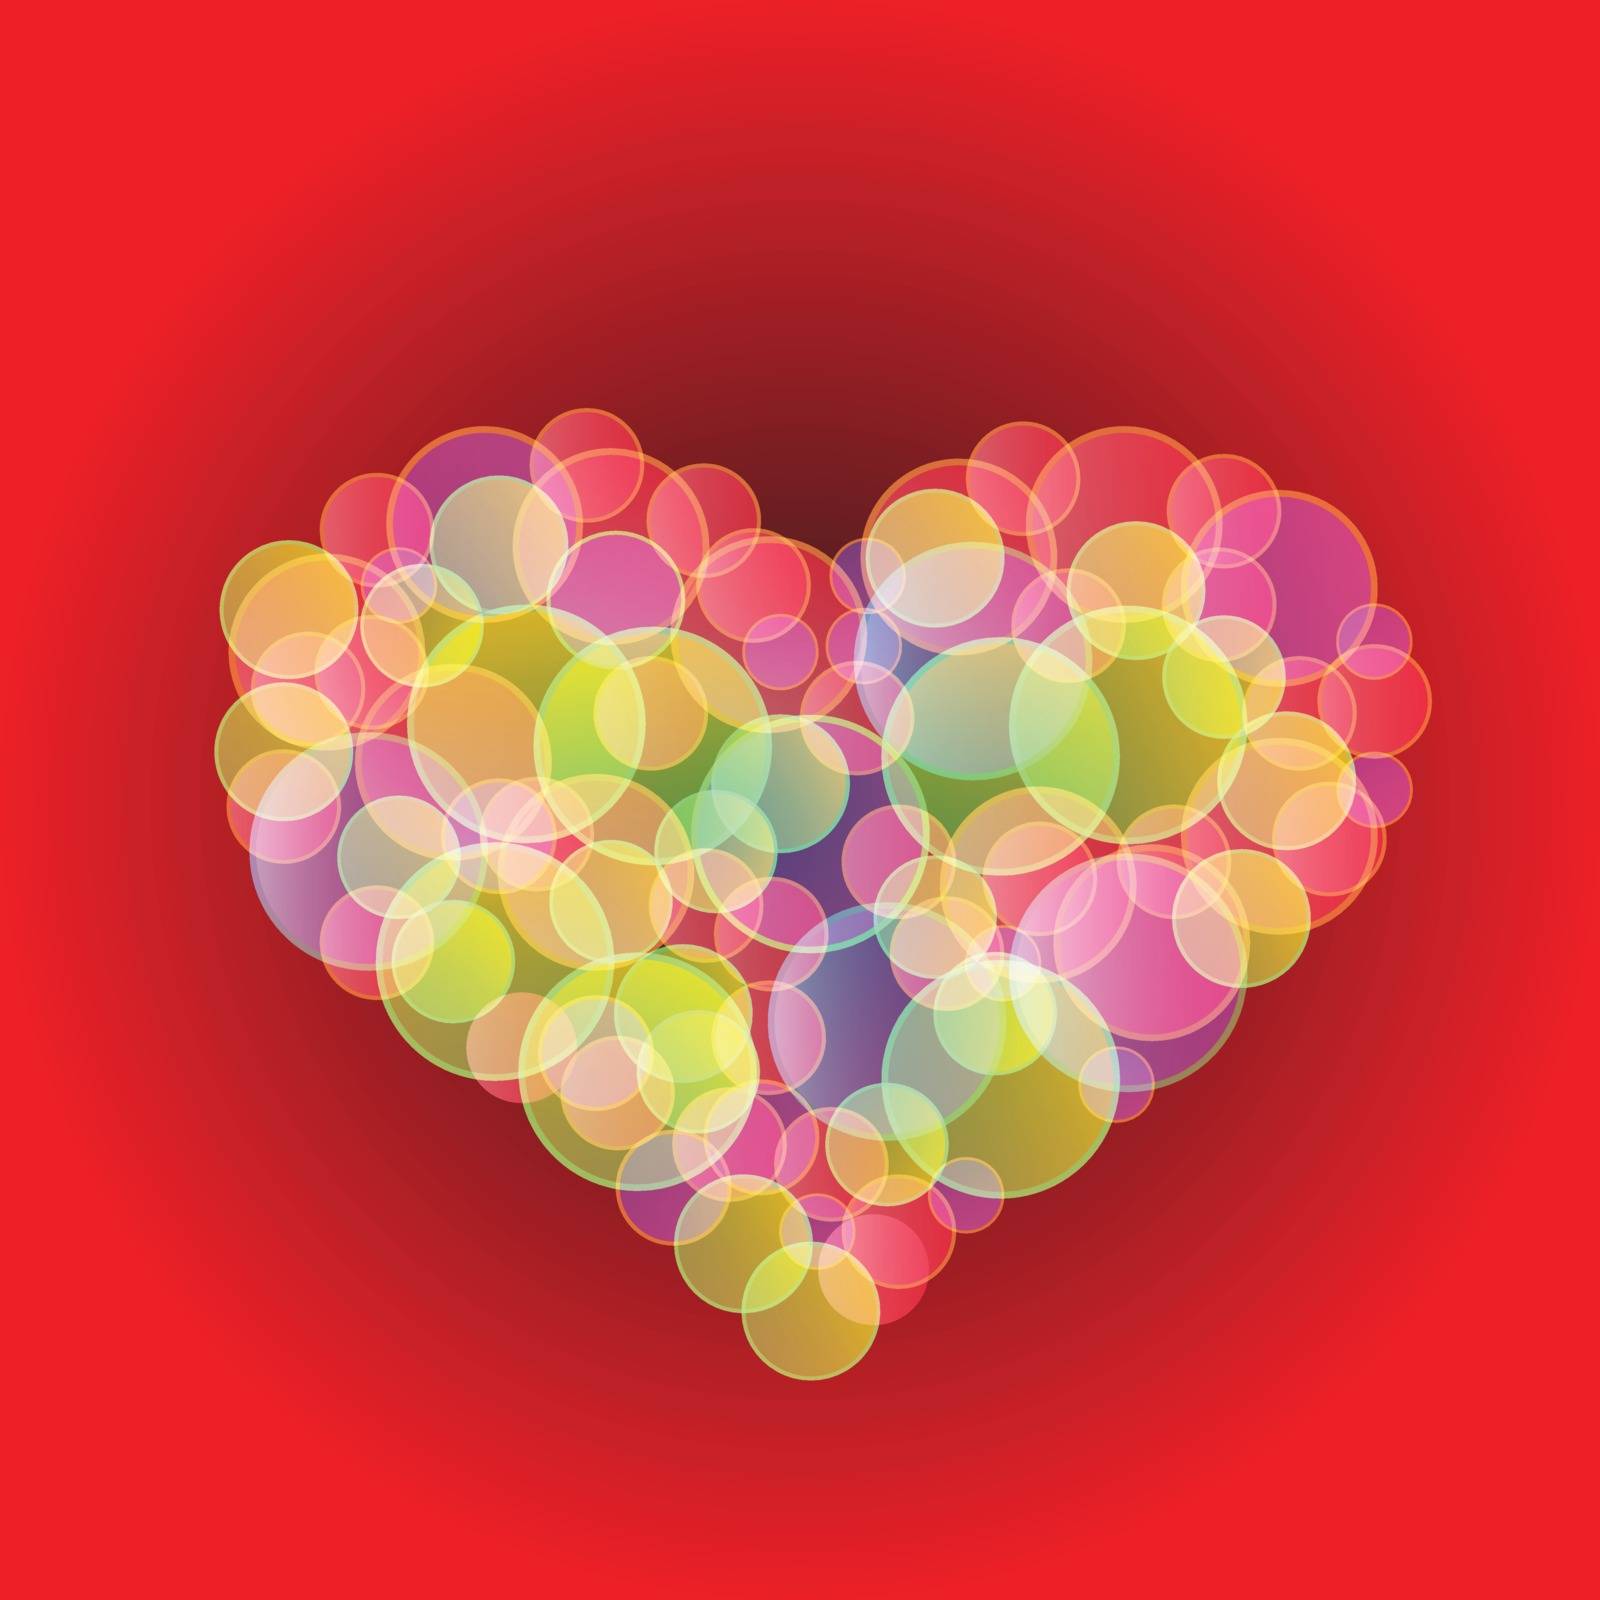 colorful illustration  with  bubble heart  on red background